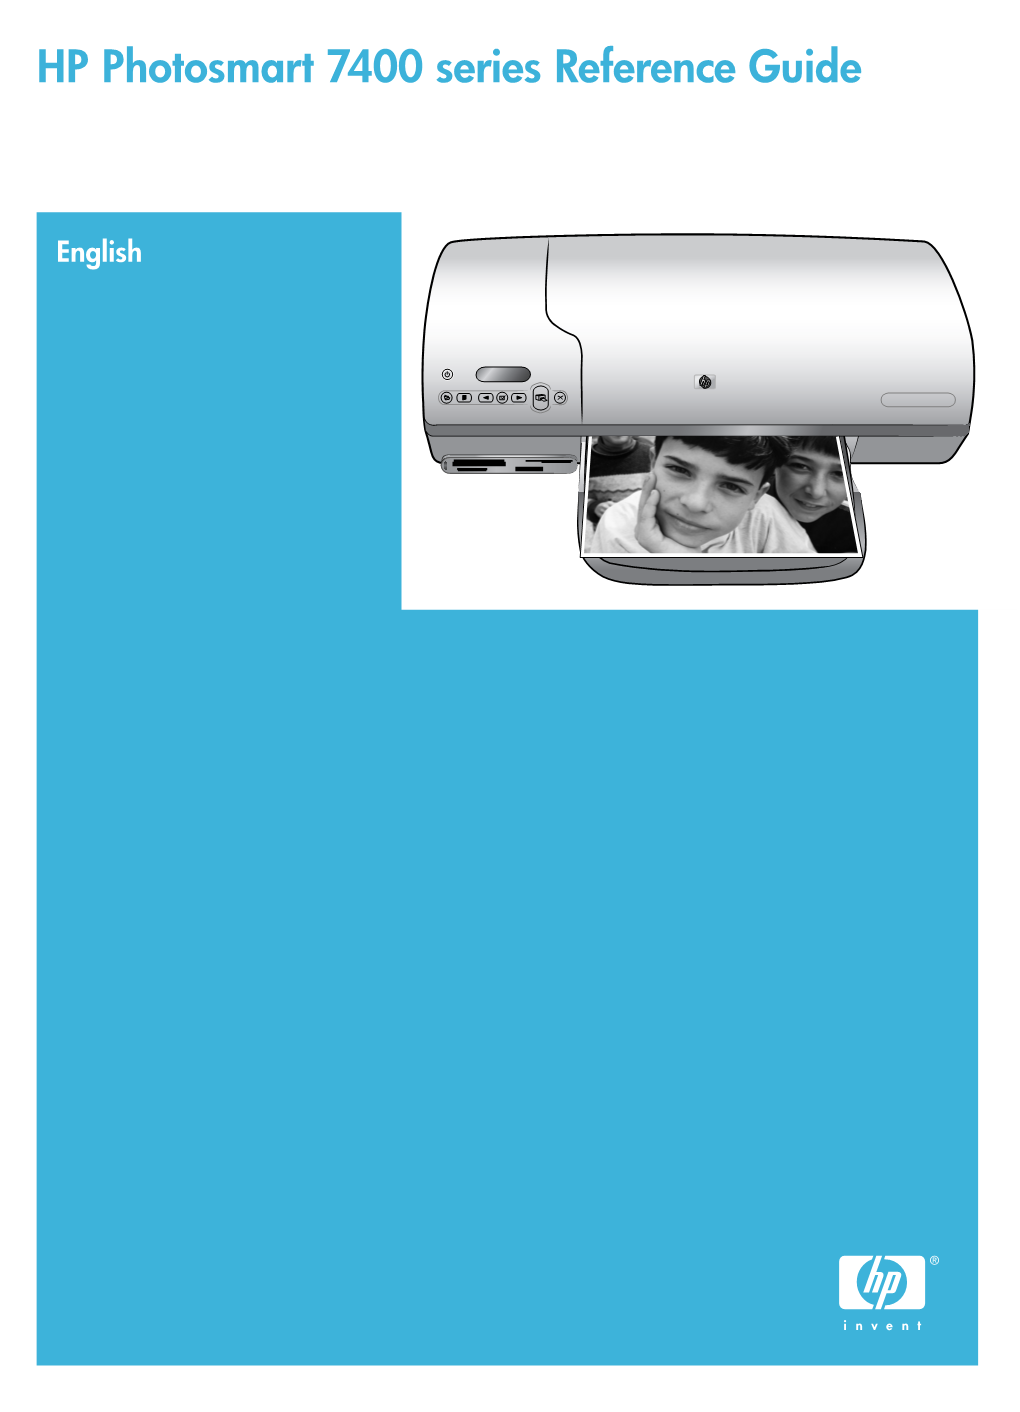 HP Photosmart 7400 Series Reference Guide